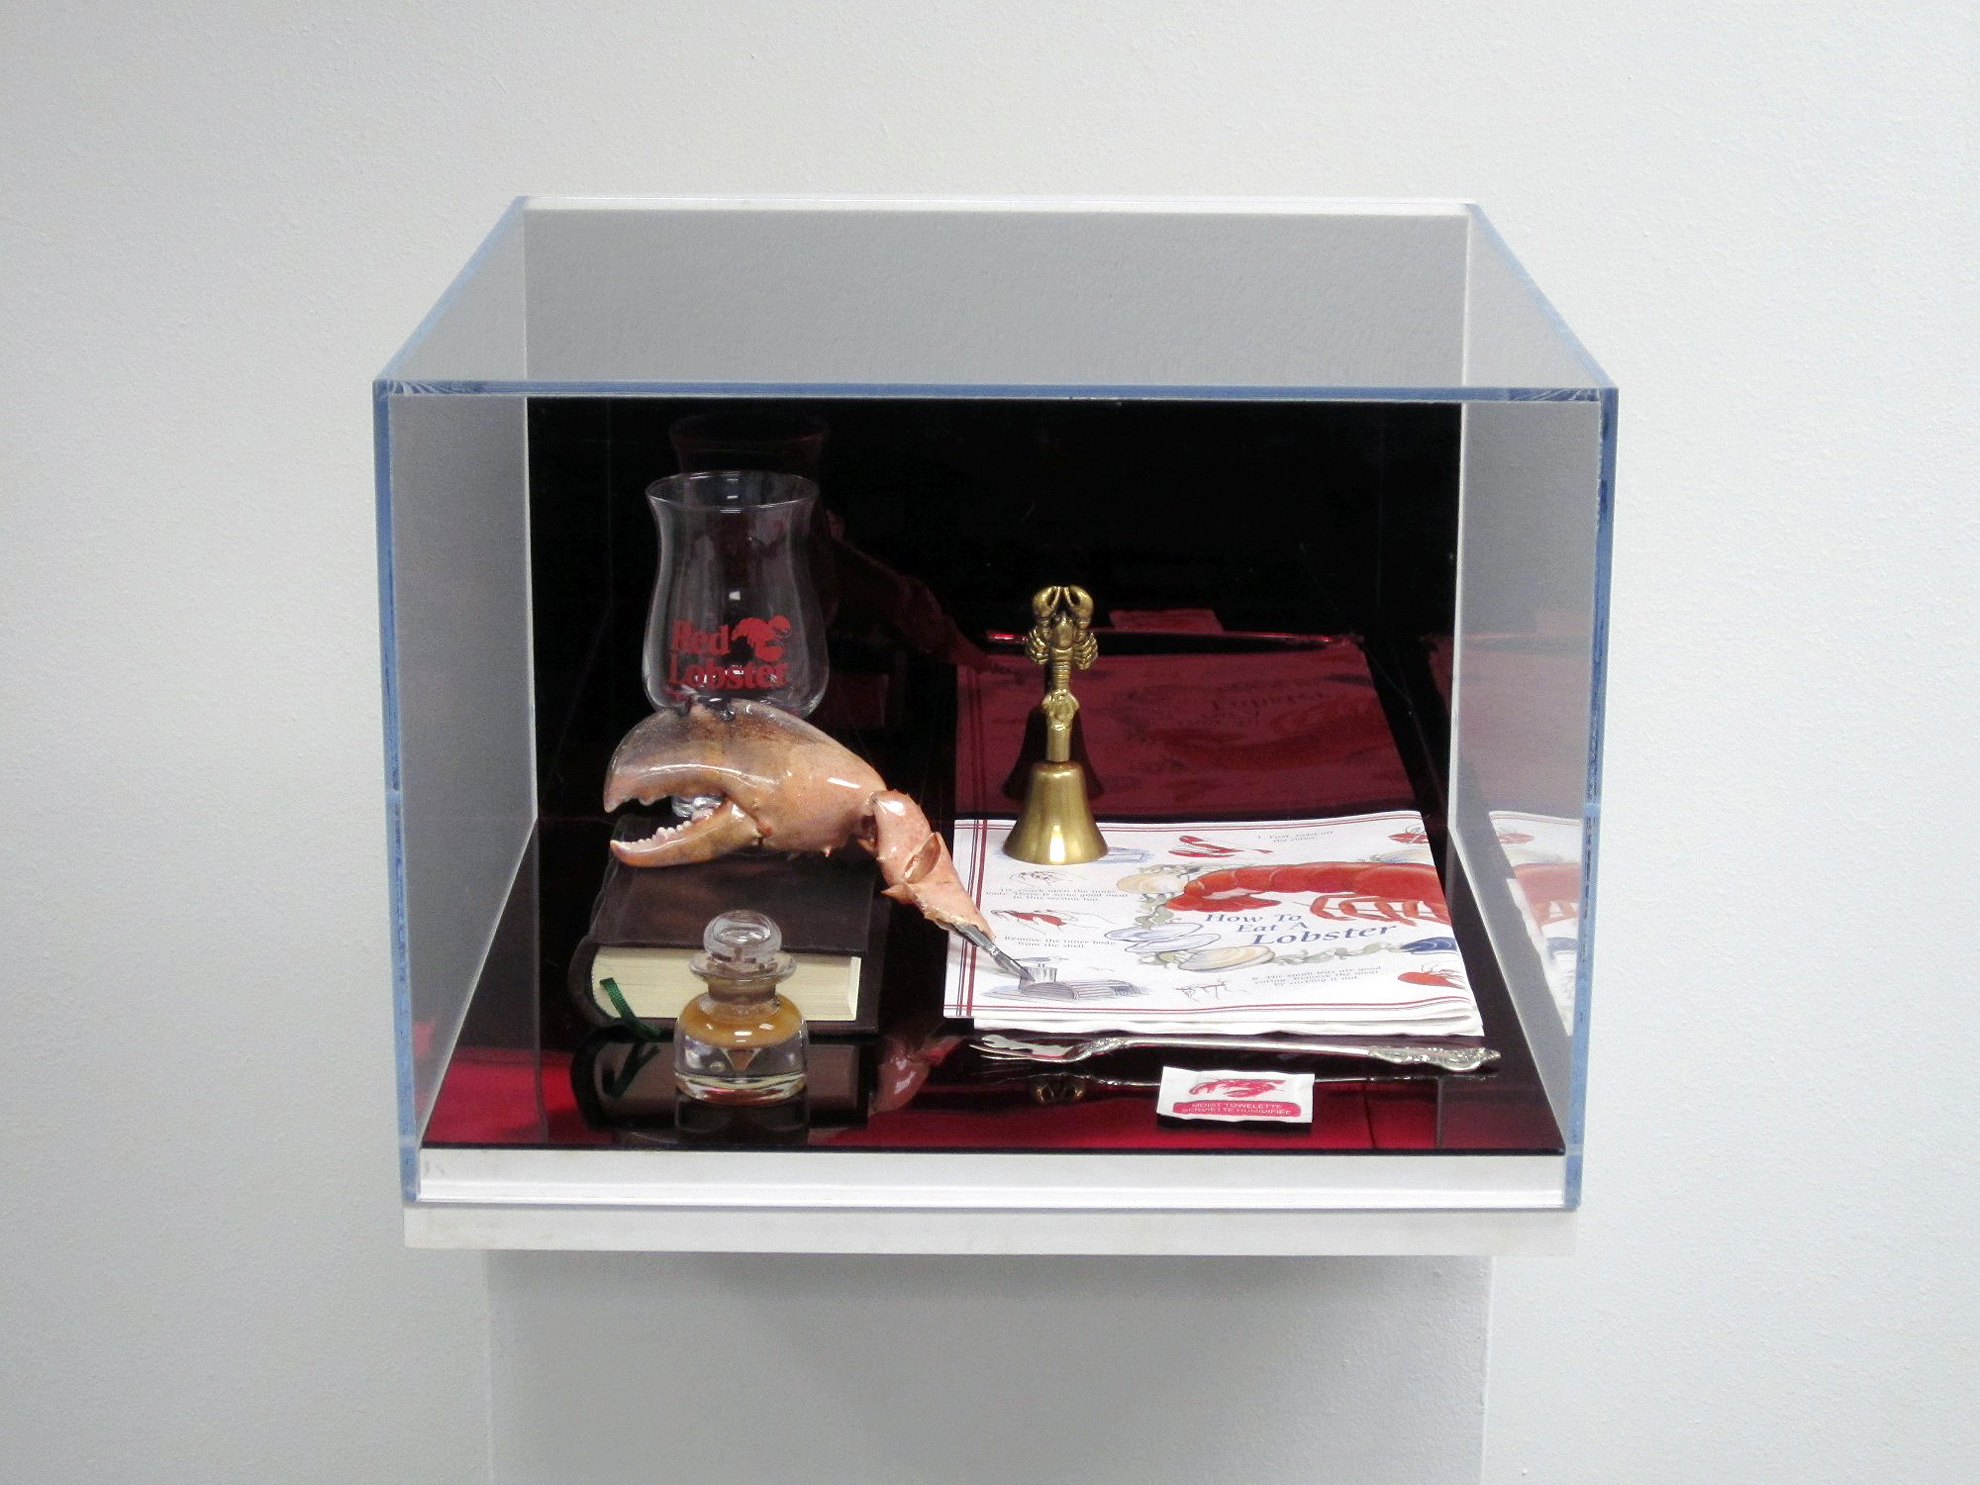   How to Eat Lobster (Ritual)  2011 Wall mounted plexi-glass and wood vitrines, contents: red mirrored plexi-glass, "Red Lobster" drinking glass, brass bell, paper placemat and napkin, leather book, moist towelette, sterling silver lobster fork, taxi